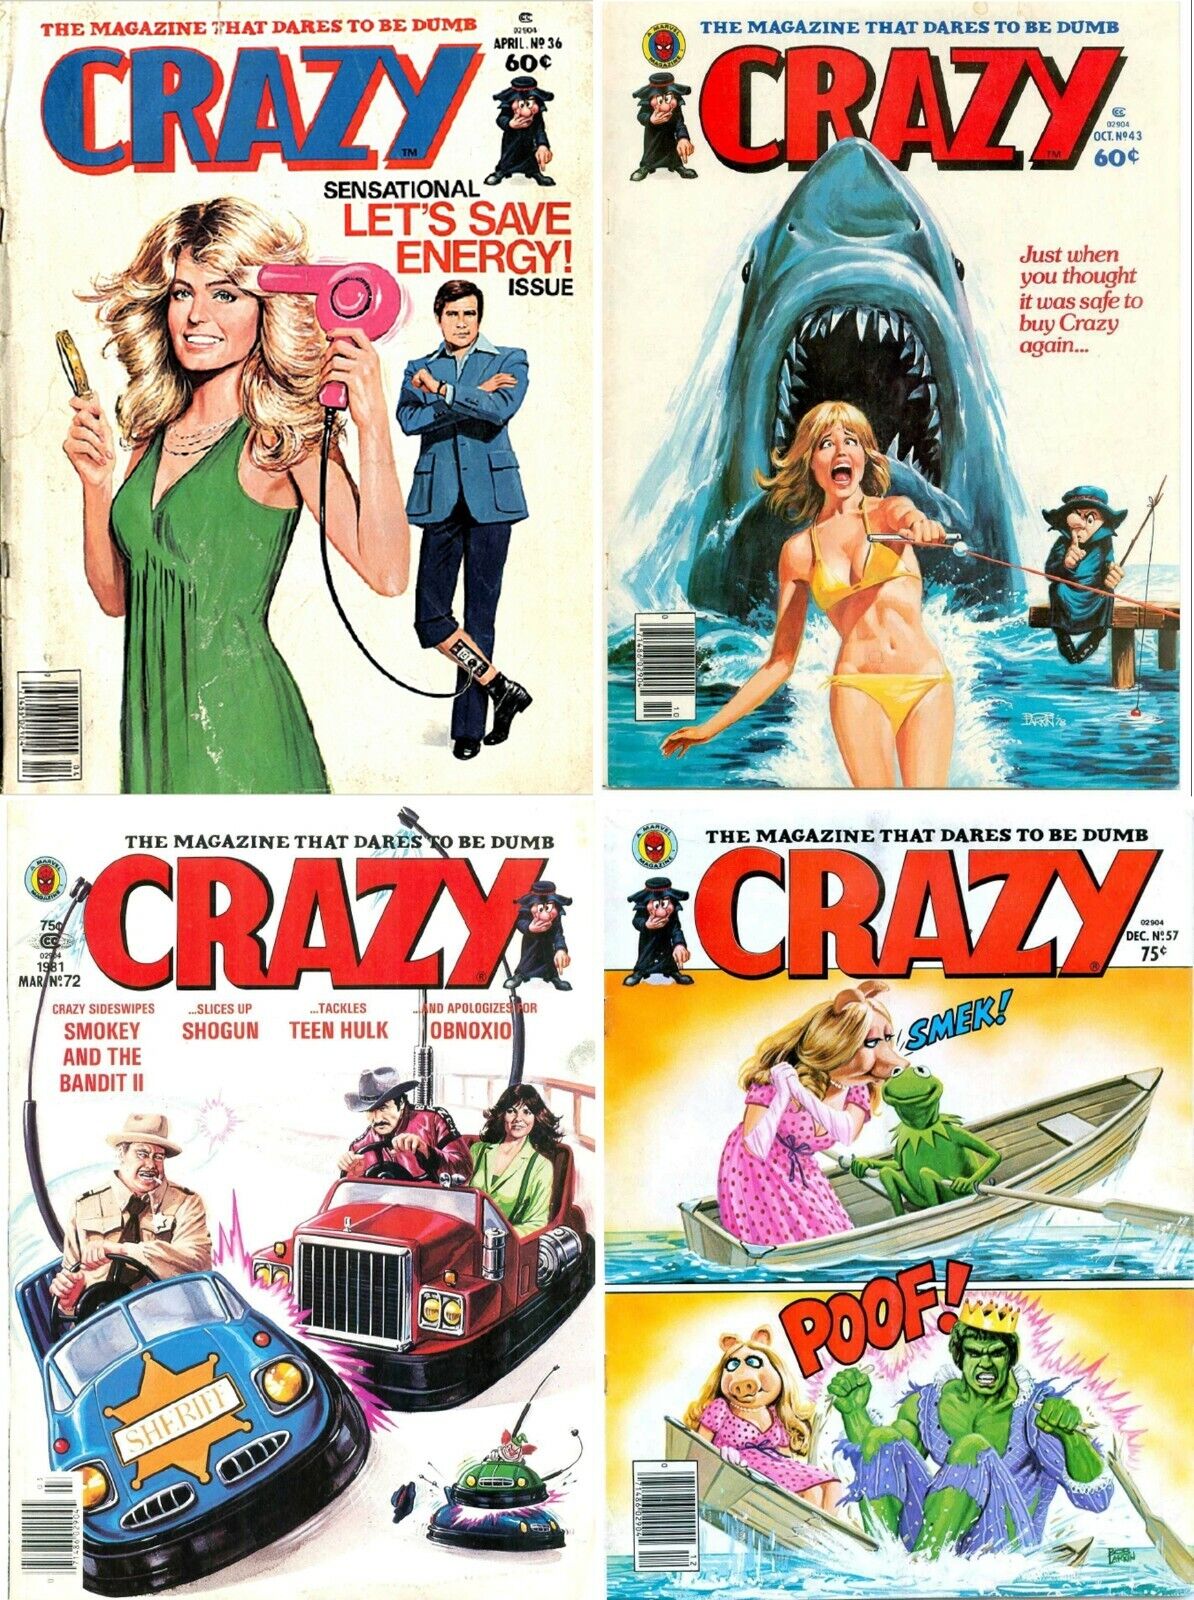 105 OLD ISSUES OF CRAZY ILLUSTRATED SATIRE HUMOR FUNNY COMICS MAGAZINE ON DVD